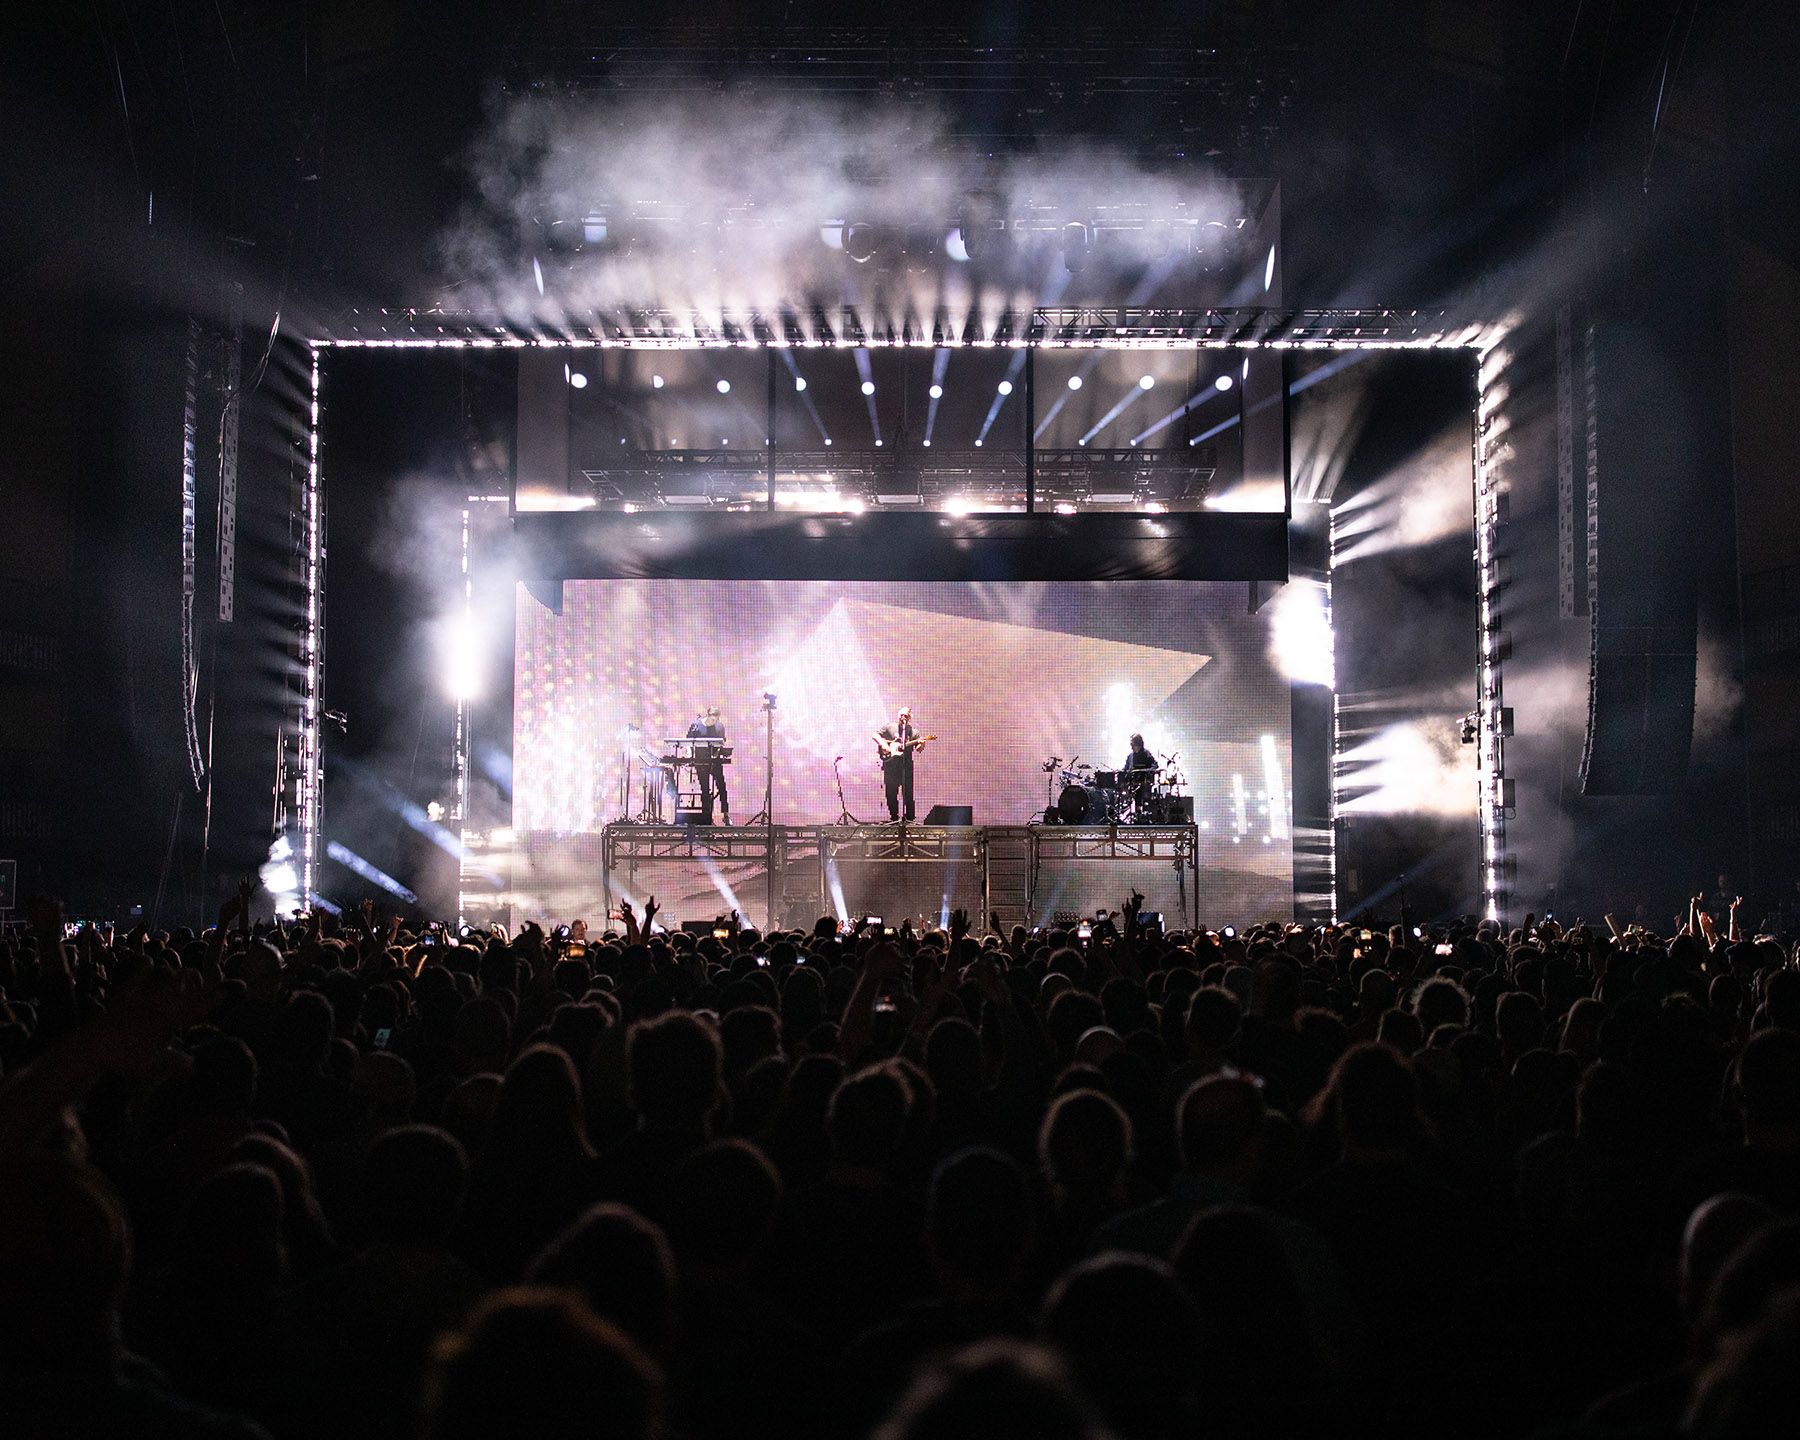 Worley Sound Carries Dream PA from L-Acoustics on alt-J’s The Dream Tour featured image